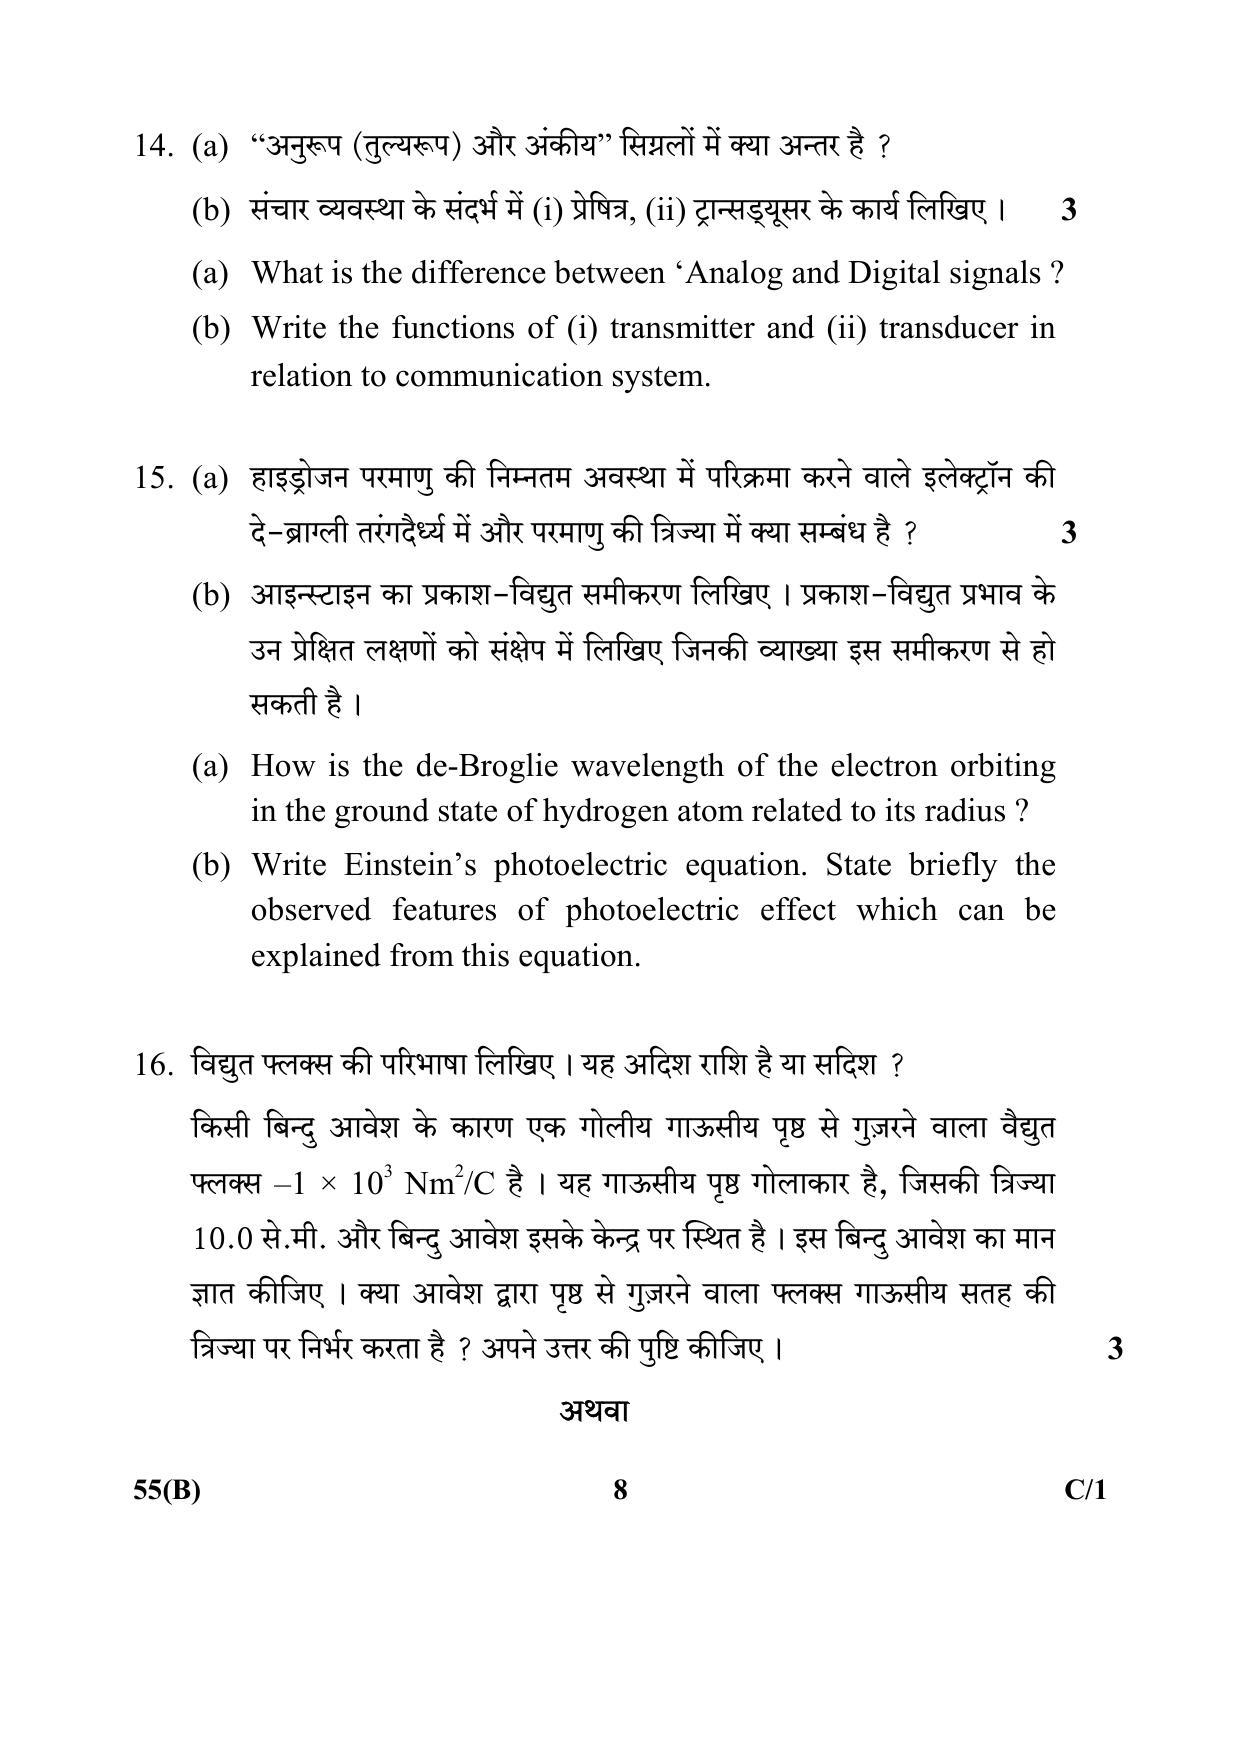 CBSE Class 12 55(B) (Physics) 2018 Compartment Question Paper - Page 8